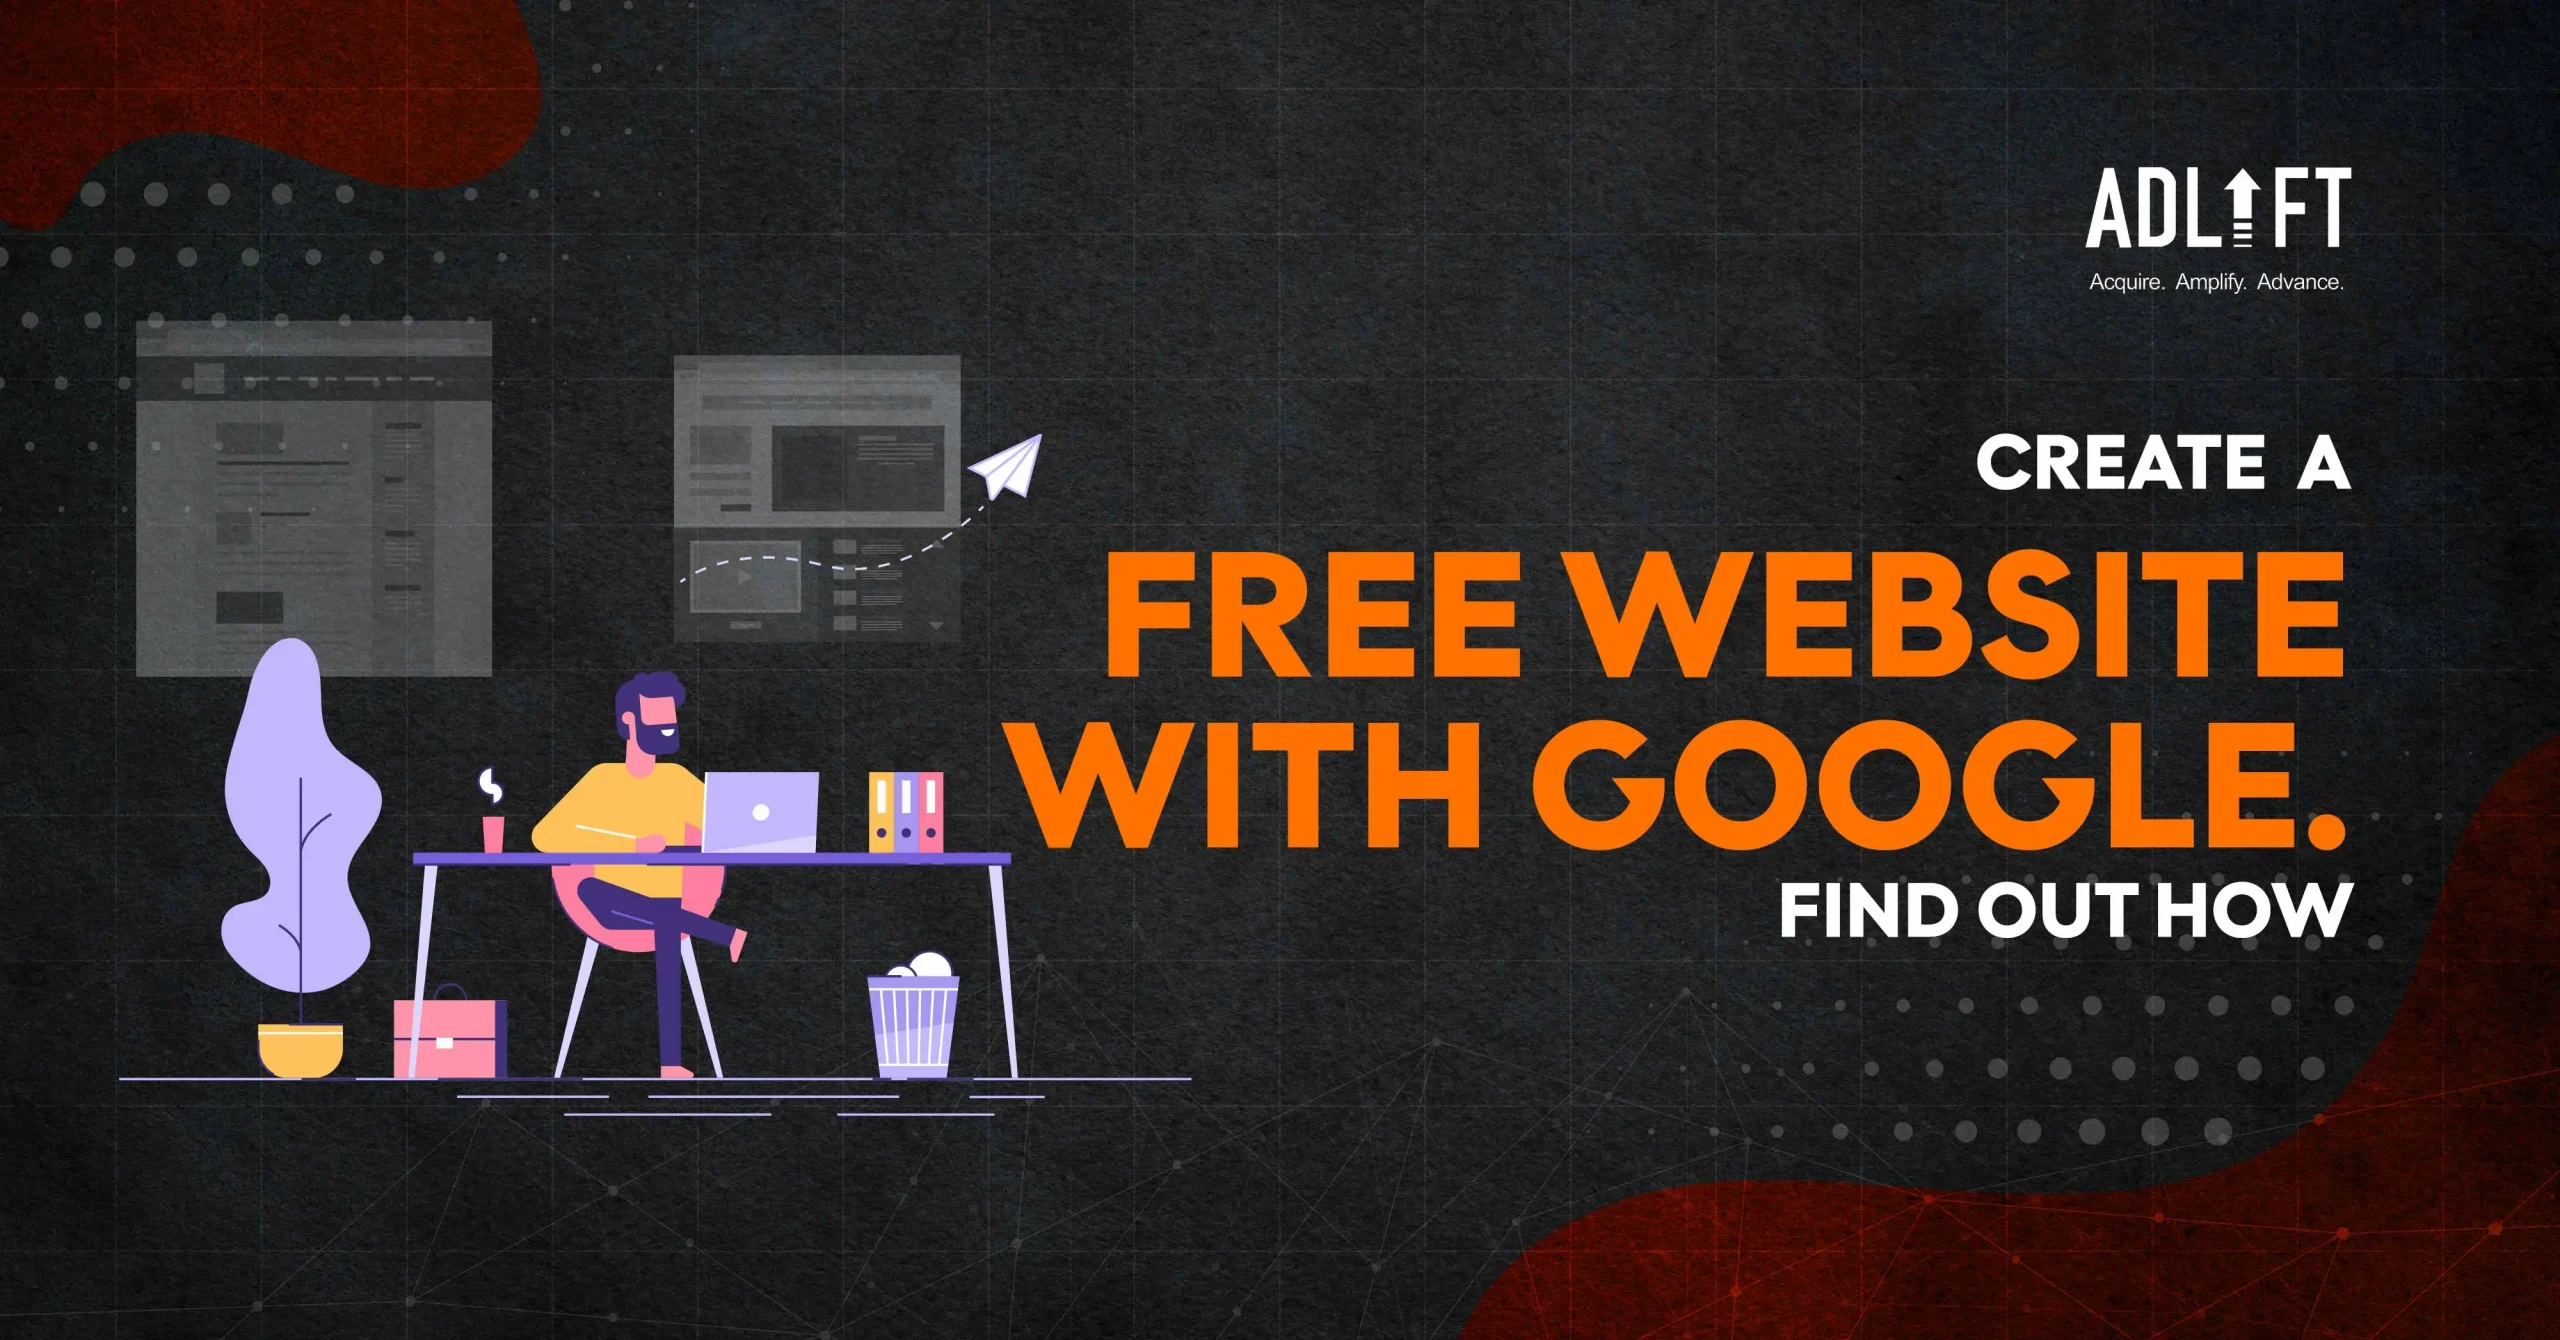 How to Create a Website on Google for Free: A Step-by-Step Guide